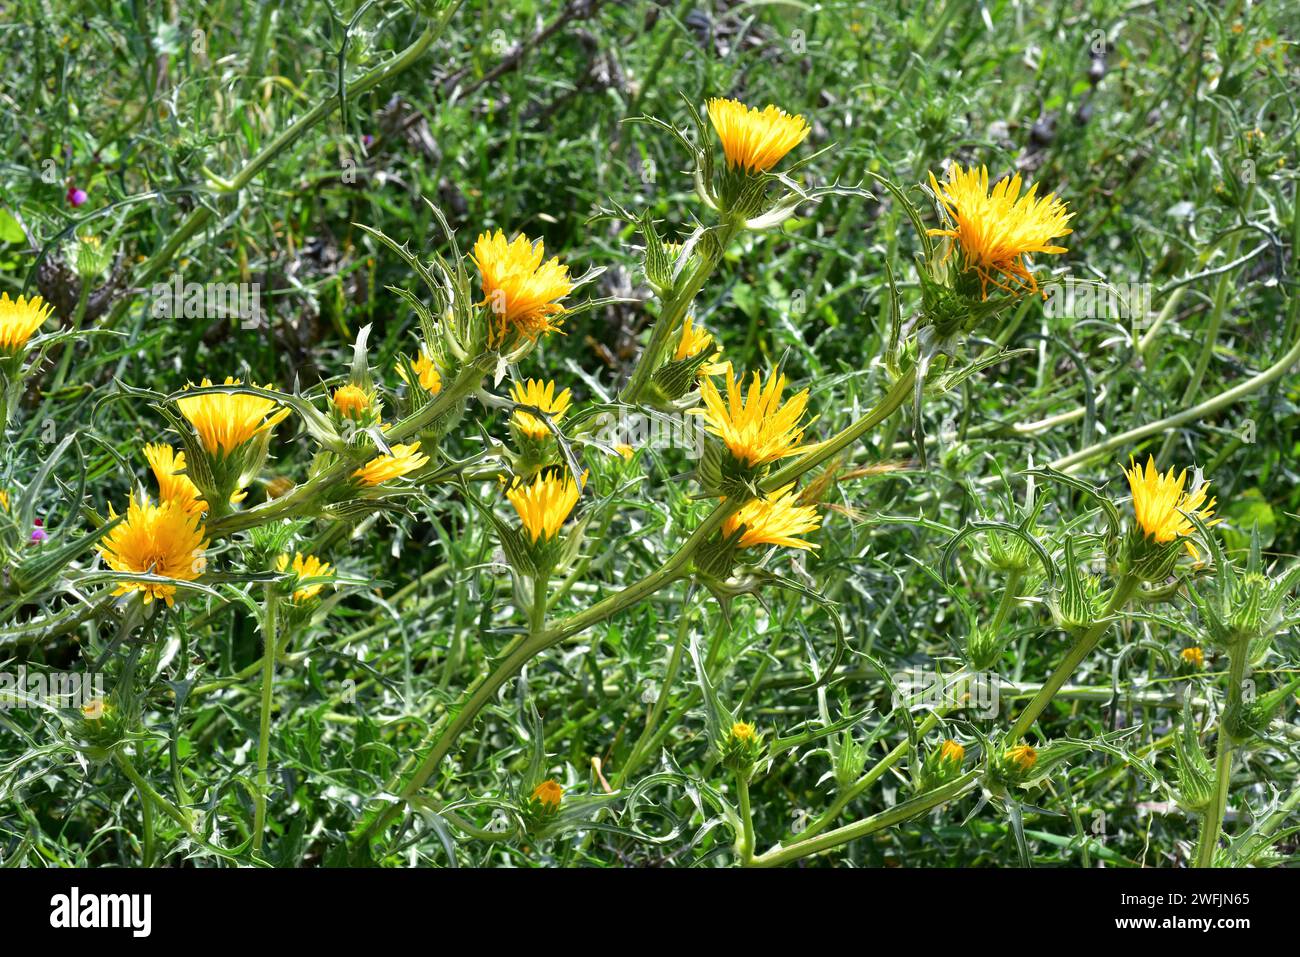 Scolymus grandiflorus is an annual or perennial plant native to northern Africa, Italy, France and western Asia. Chapters detail. Stock Photo